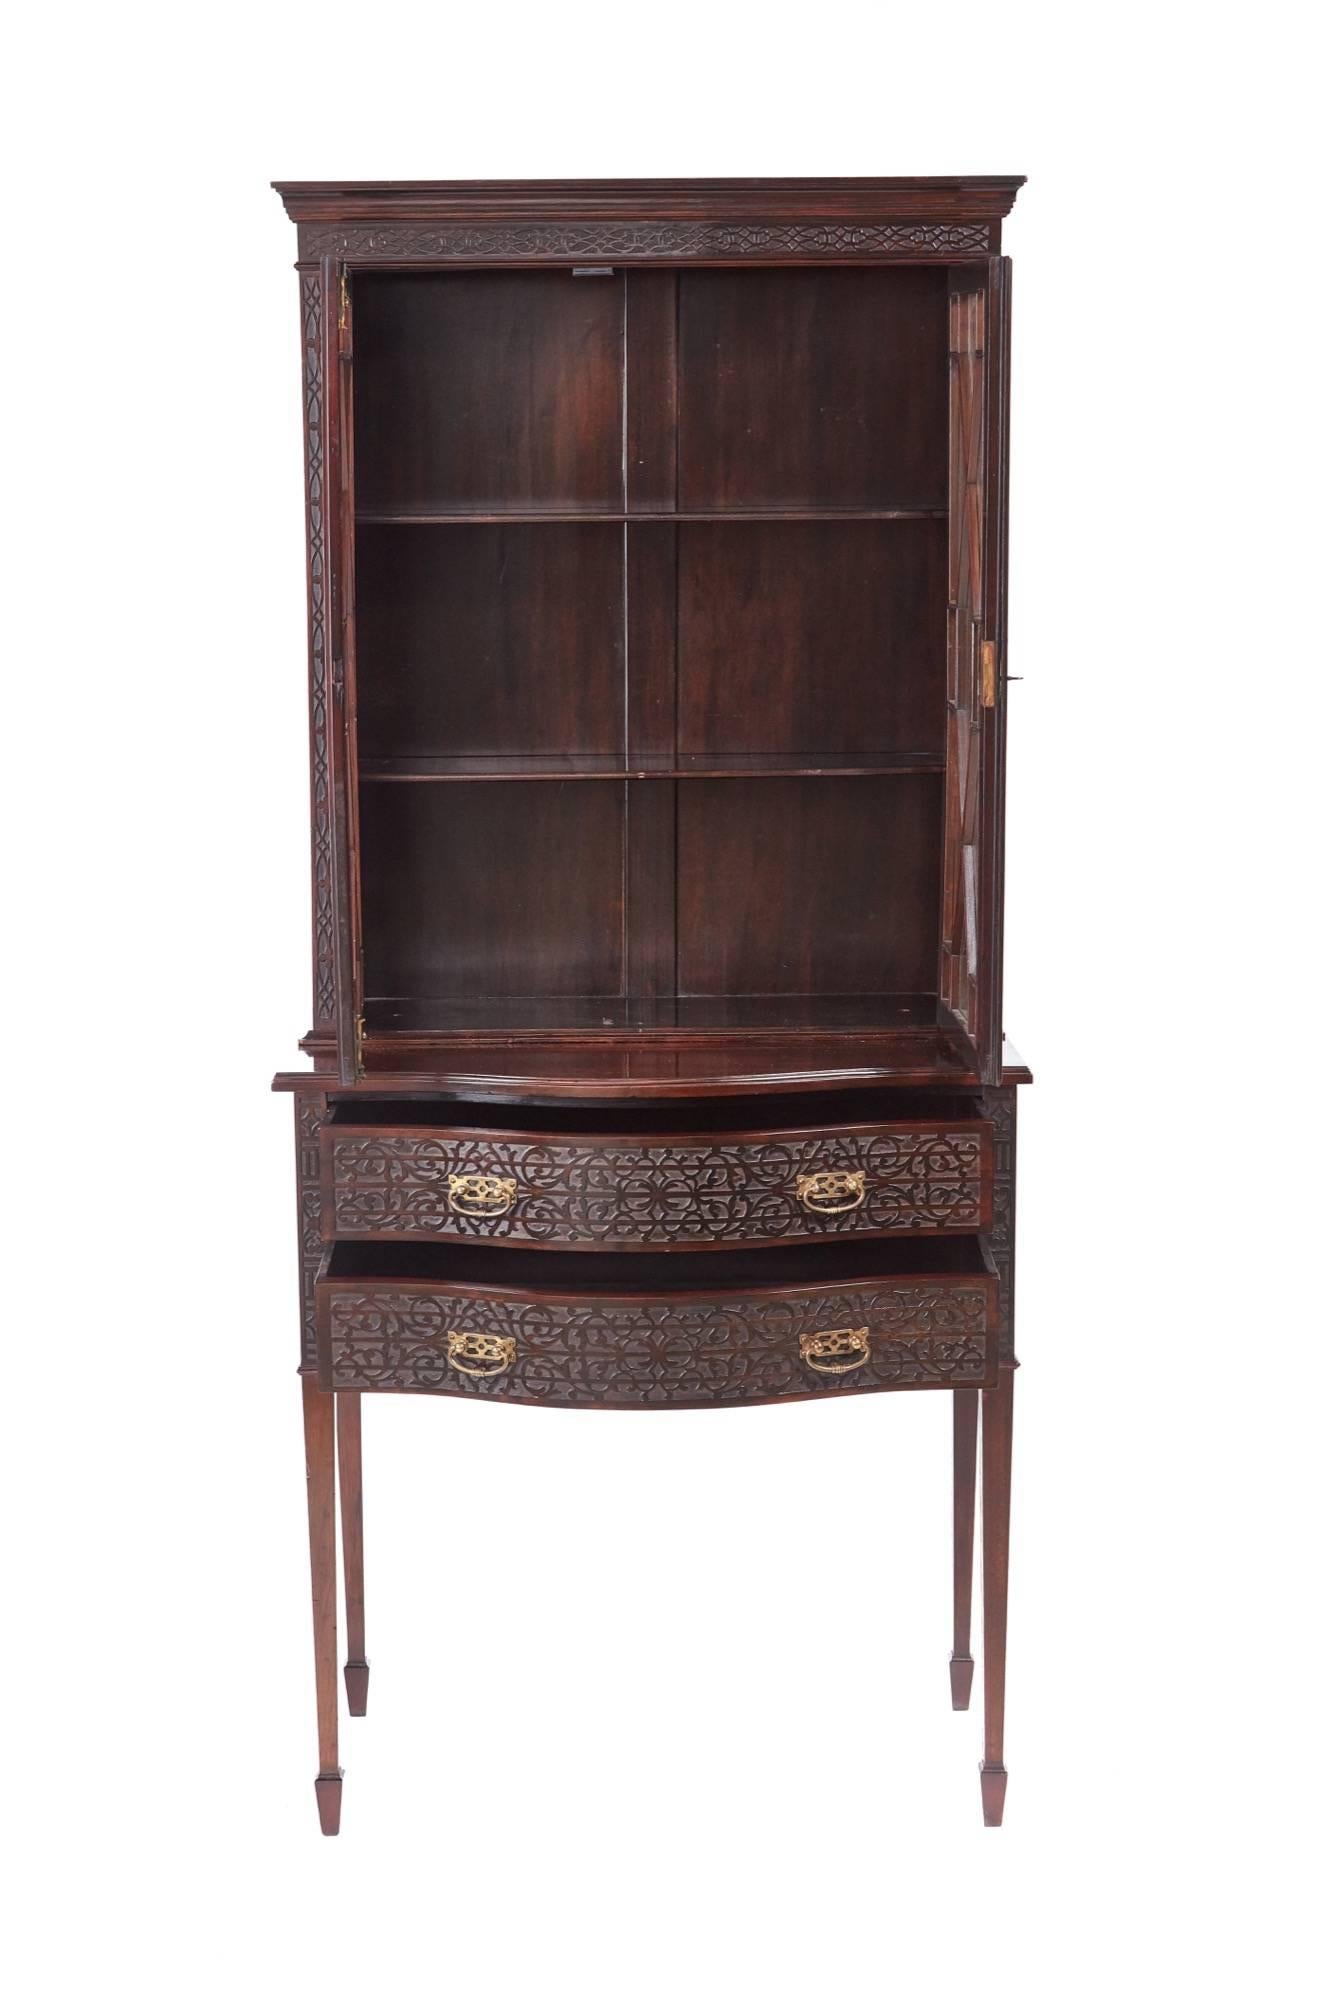 Antique mahogany blind fret display cabinet, with a shaped cornice blind fret frieze, two astragal glazed doors opening to reveal two adjustable shelves, the base having two serpentine shaped blind fret drawers with original brass handles, supported